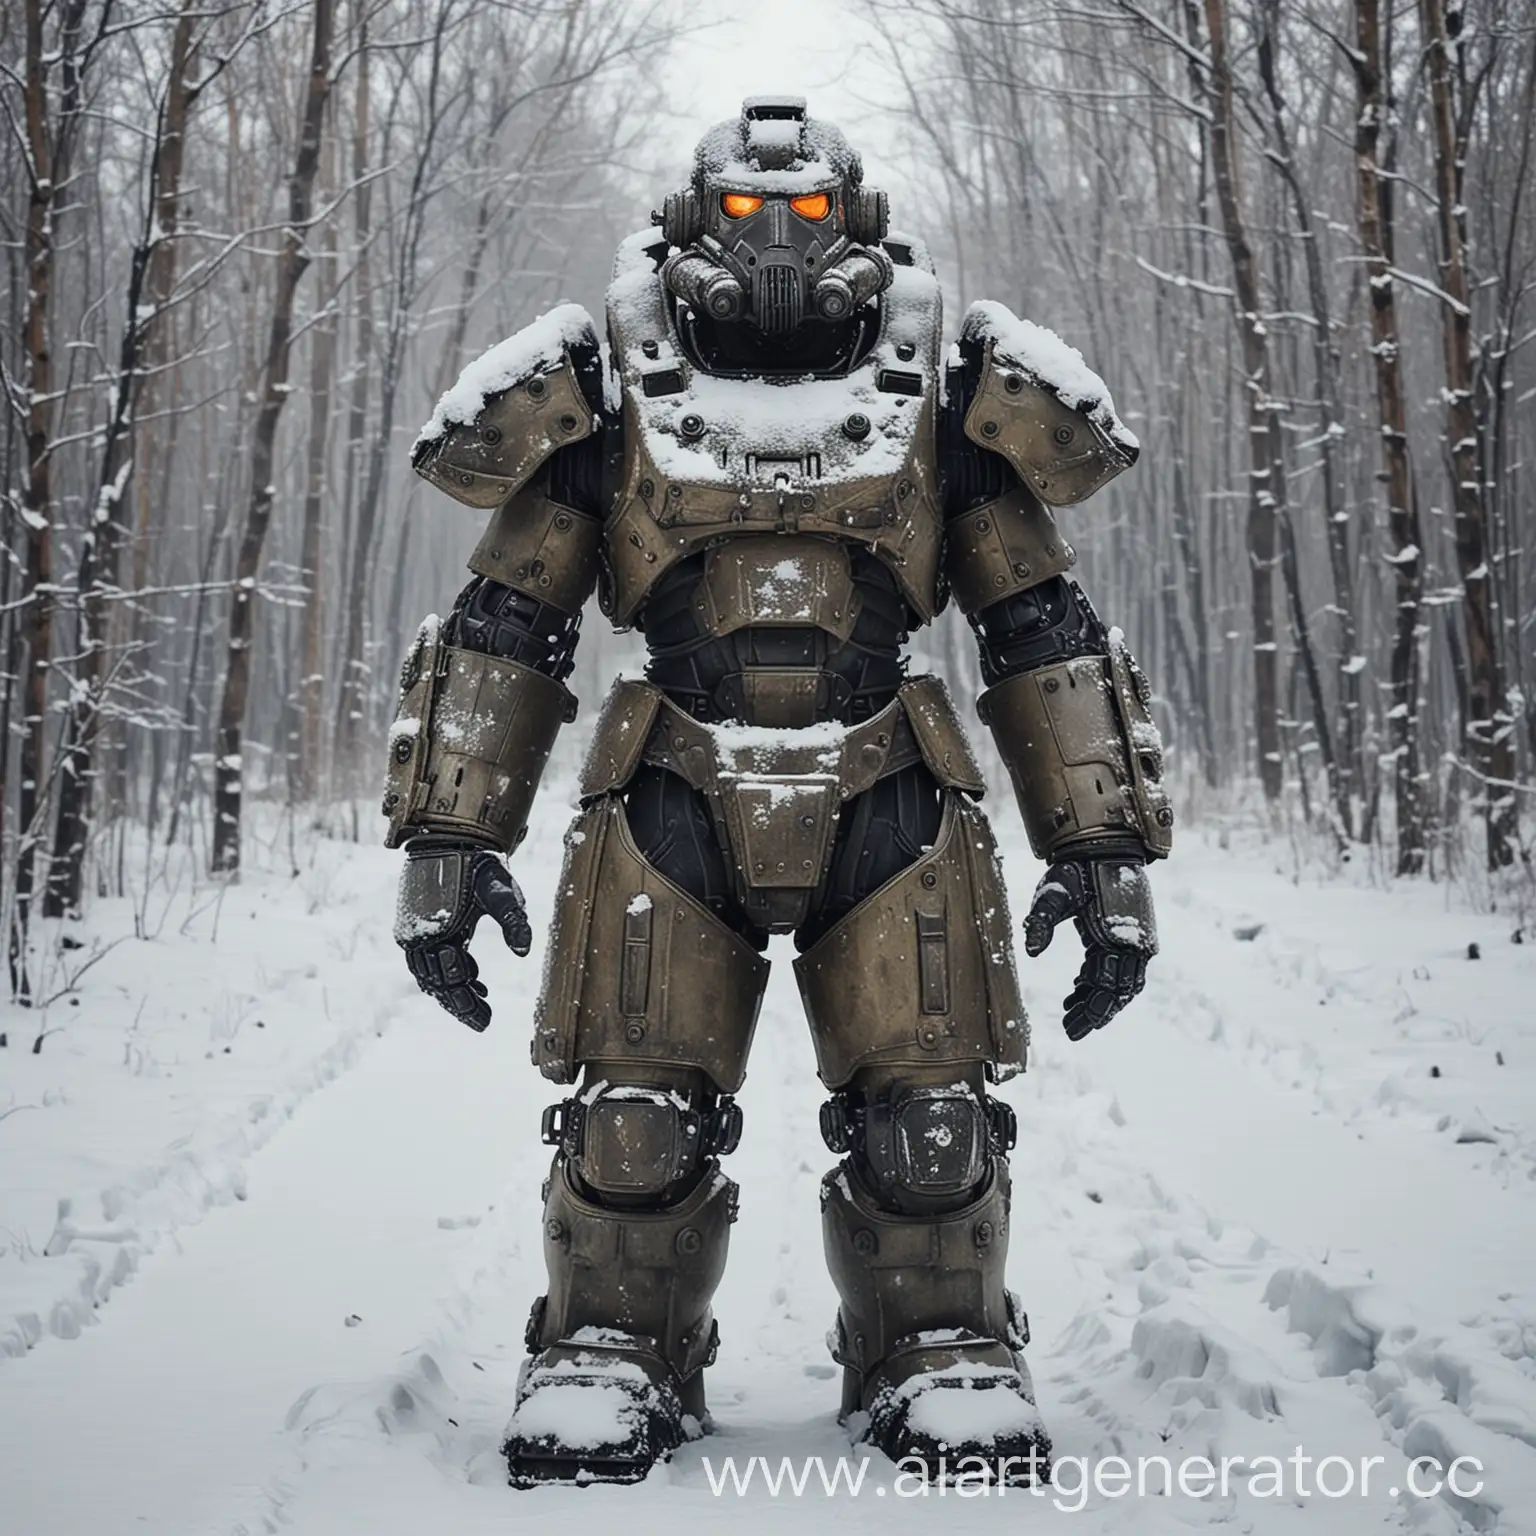 Russian-Winter-Power-Armor-Advanced-Military-Technology-Battling-the-Elements